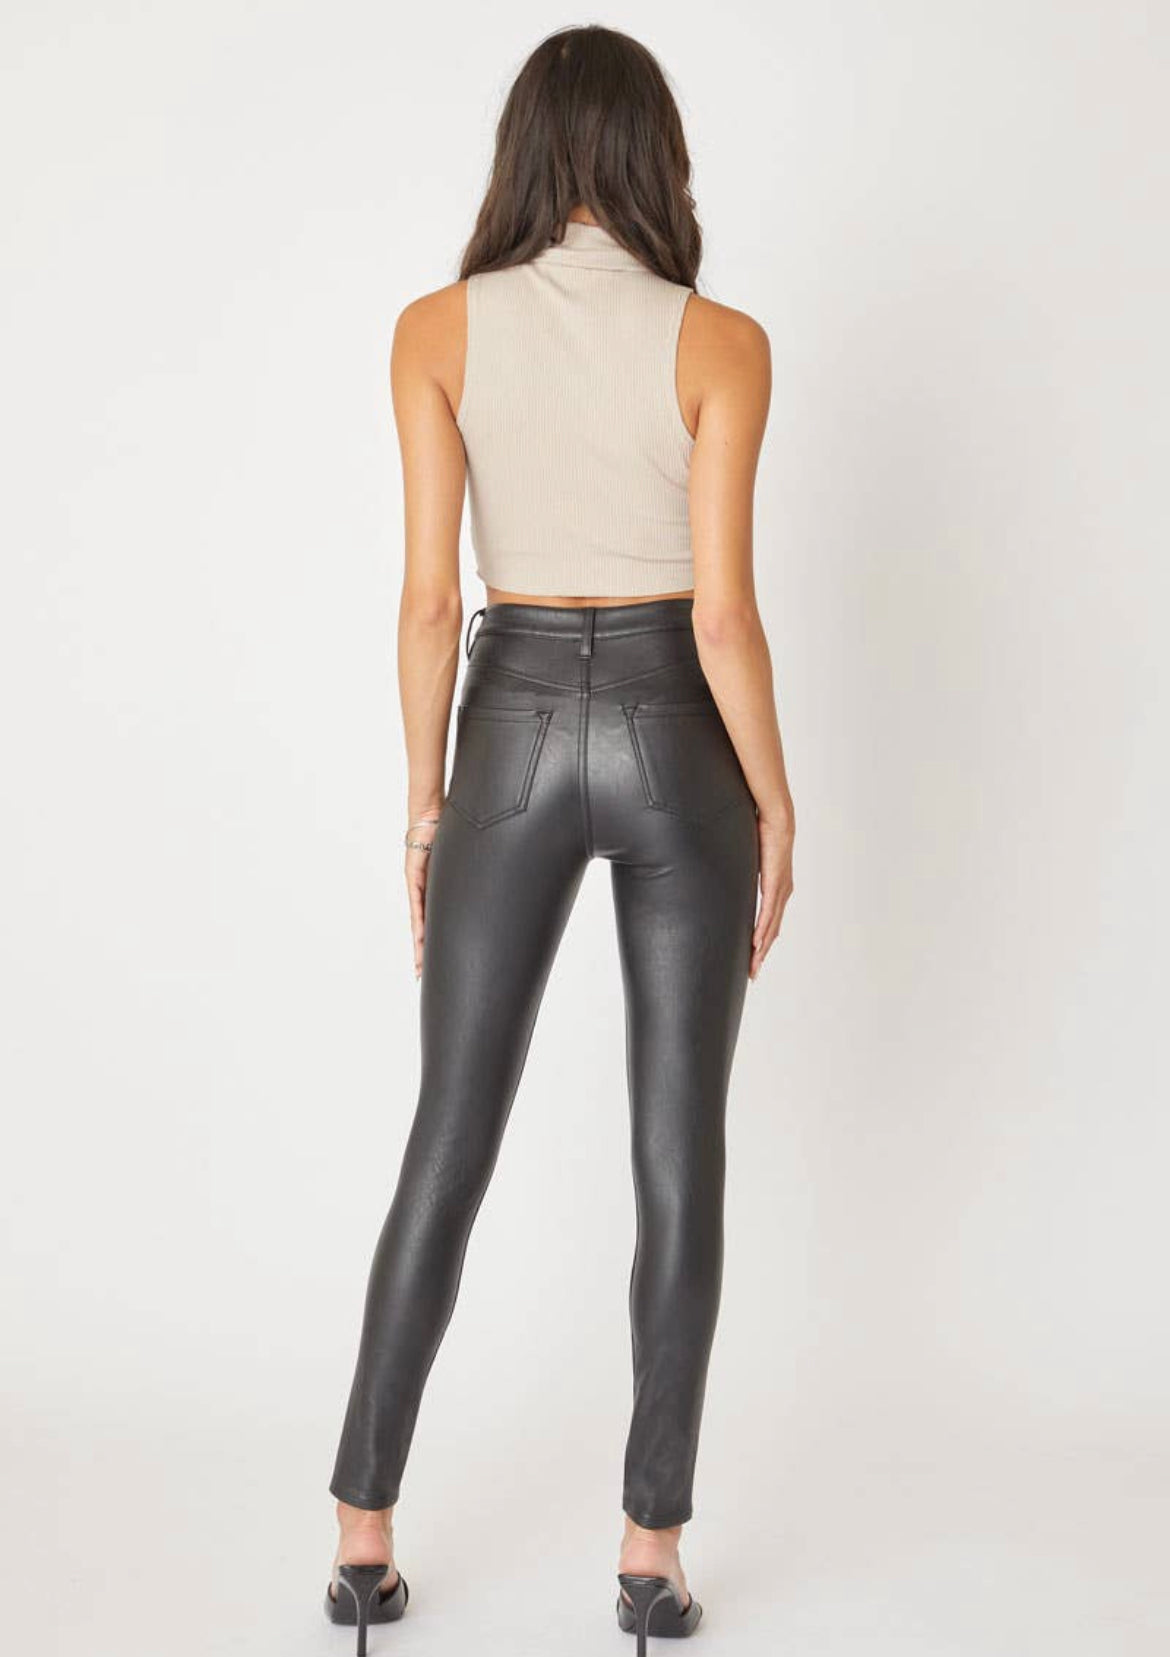 KanCan High Rise Faux Leather Skinny Pant - Women's Pants in Black